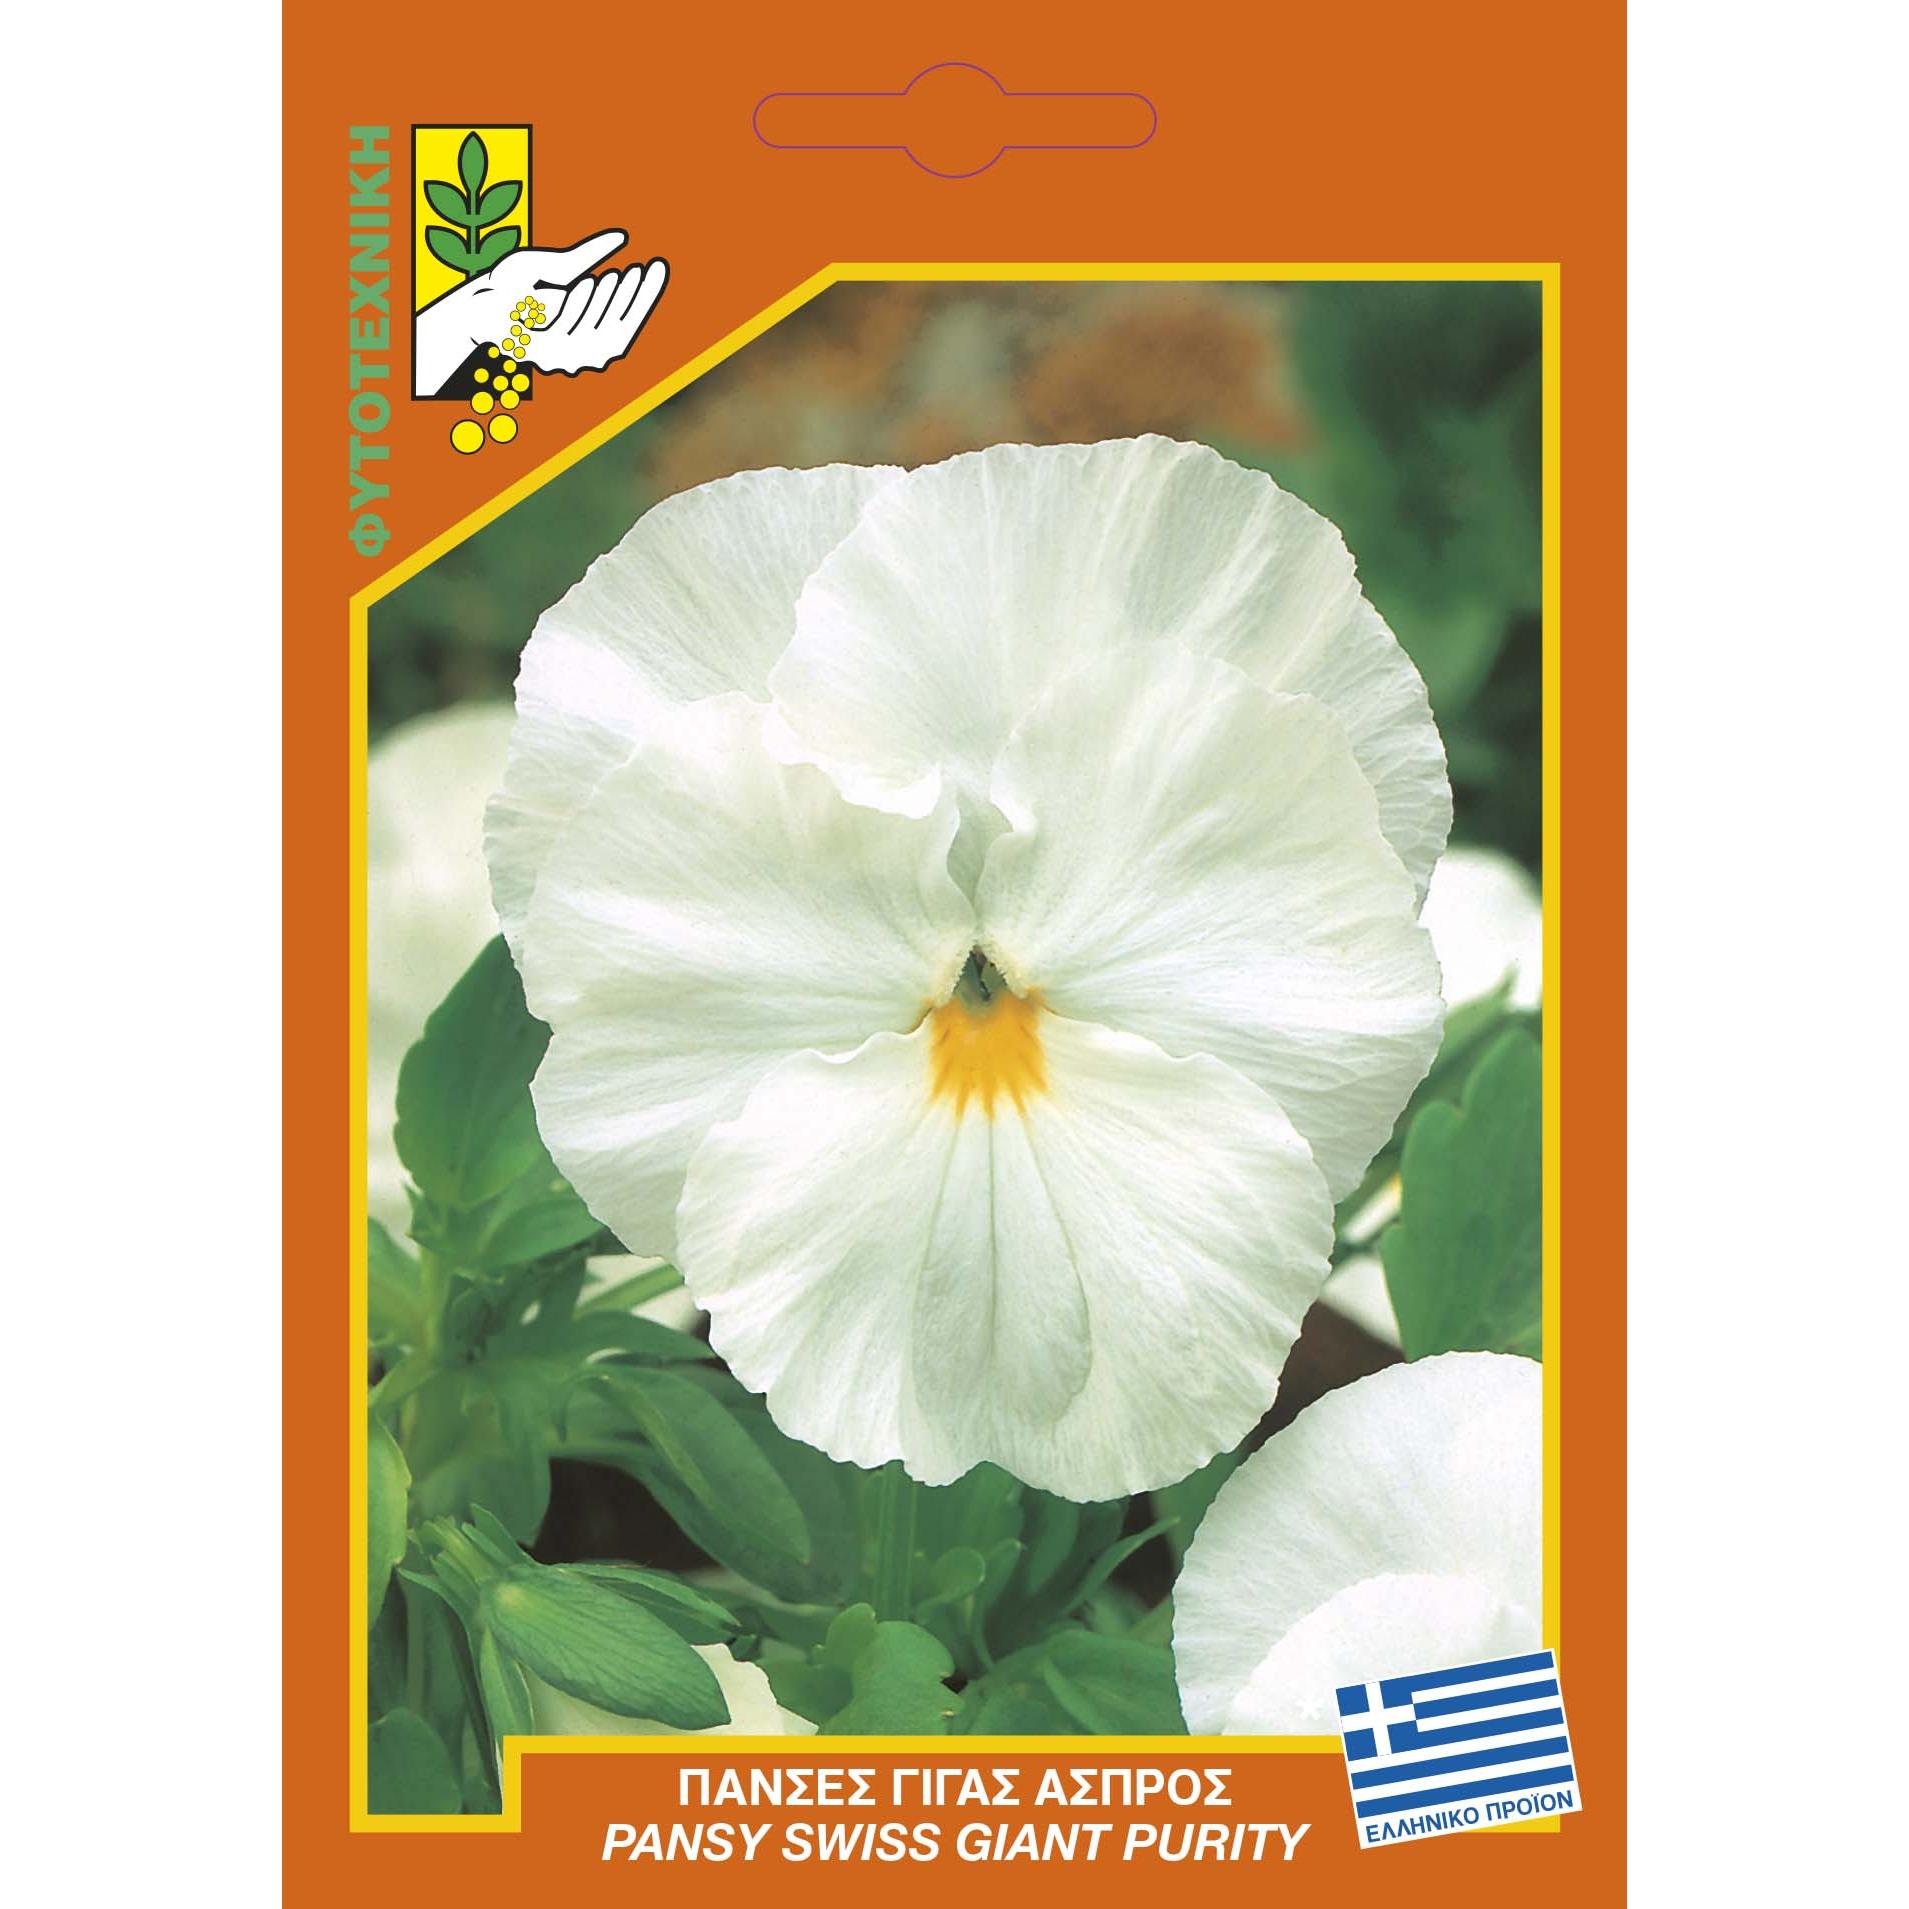 547 Pansy giant purity